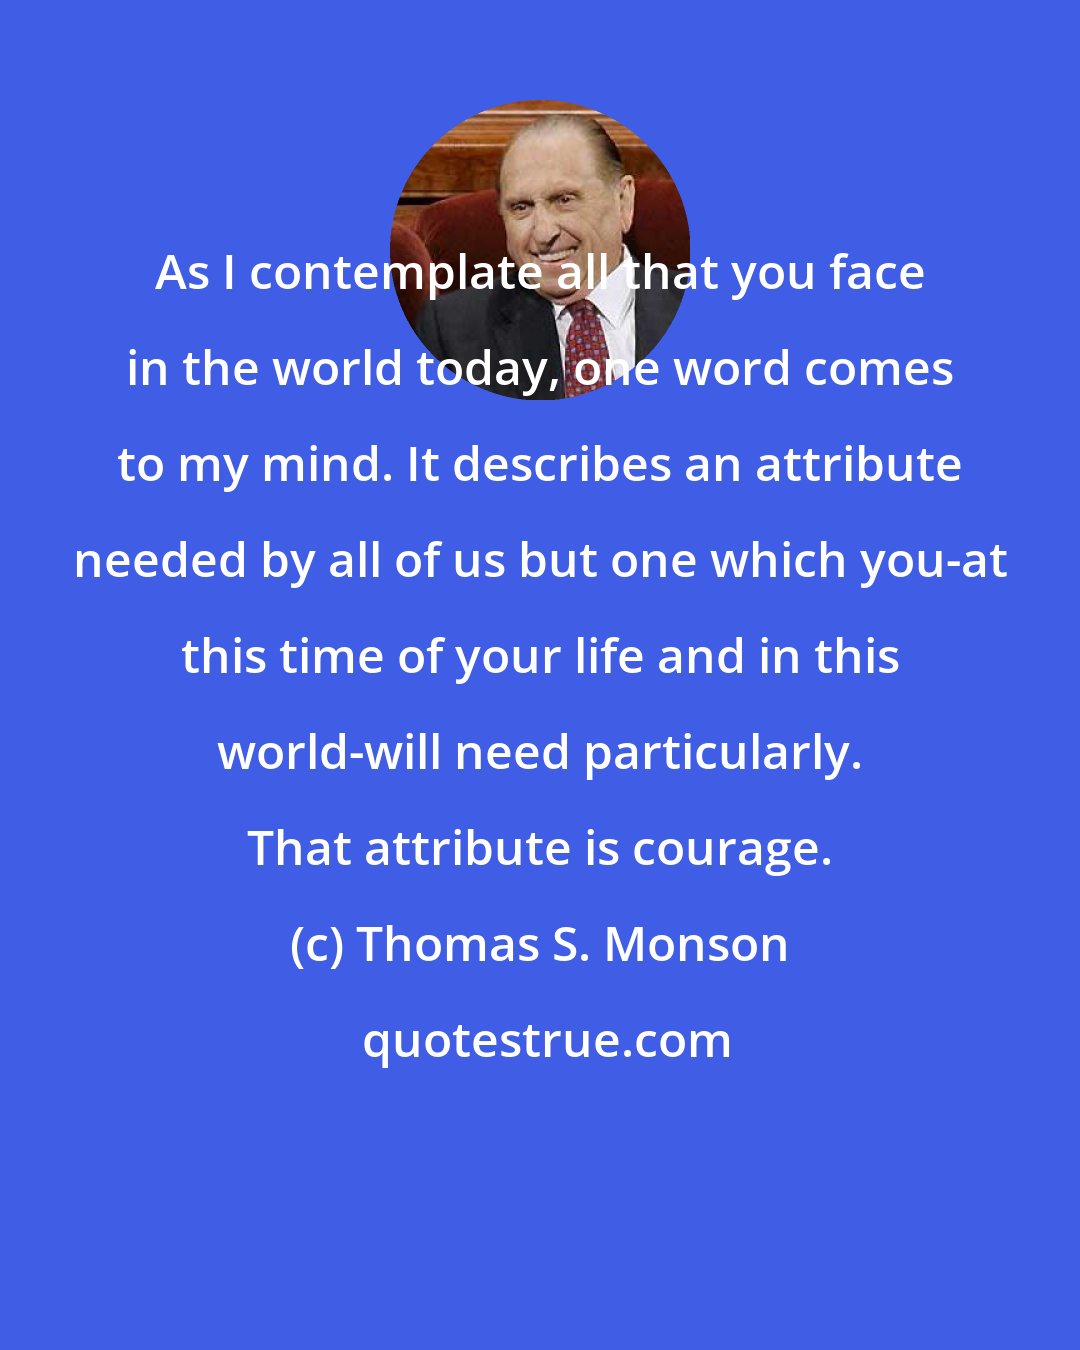 Thomas S. Monson: As I contemplate all that you face in the world today, one word comes to my mind. It describes an attribute needed by all of us but one which you-at this time of your life and in this world-will need particularly. That attribute is courage.